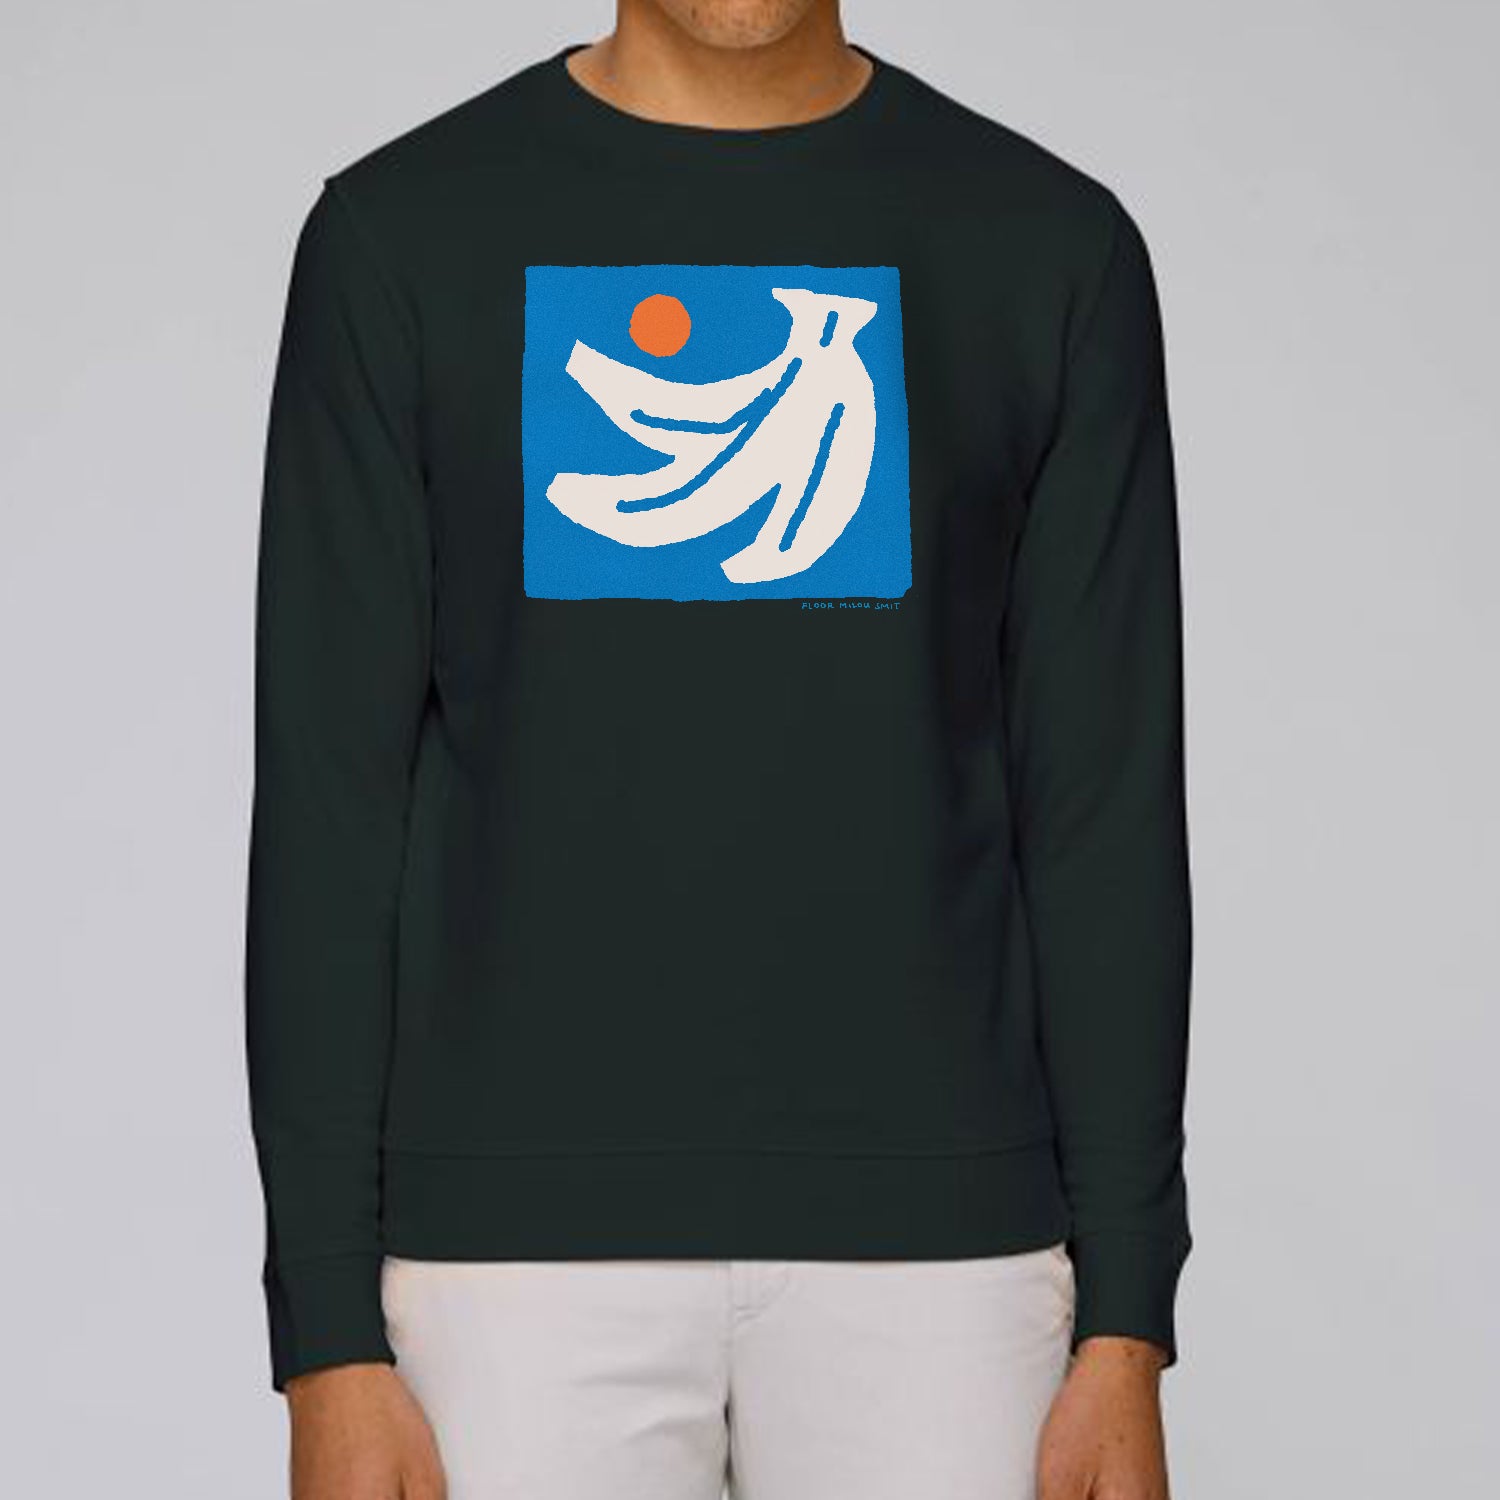 Photo of a model wearing a black sweater. The print on the sweater is an off-white hand of bananas with an orange circle next to them on a blue square background.